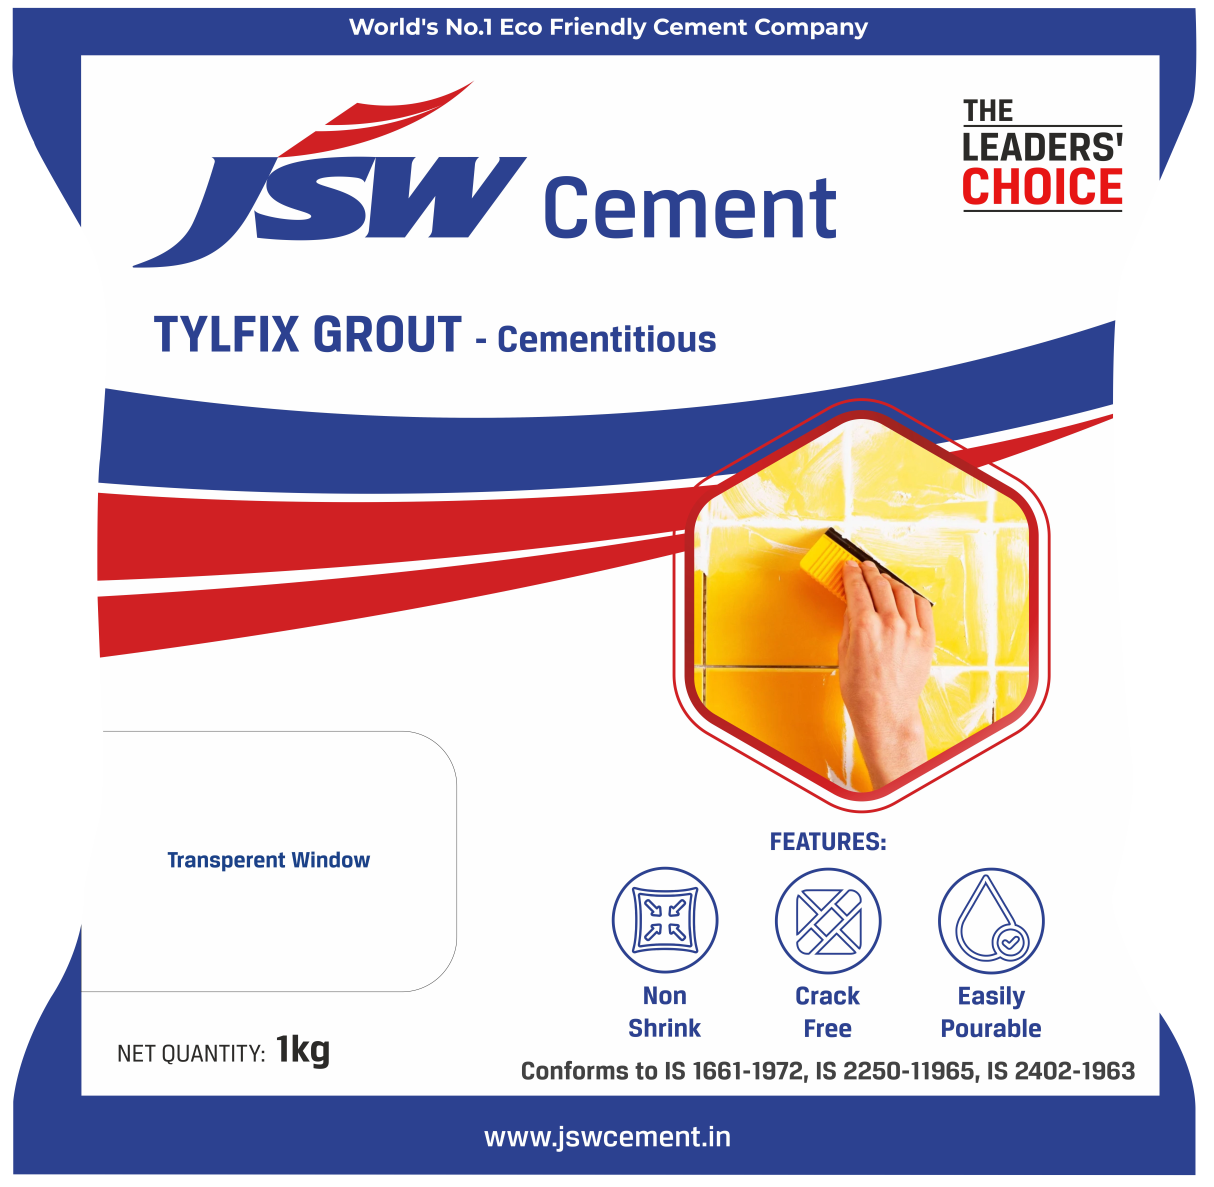 JSW TYLFIX GROUT - CEMENTITIOUS